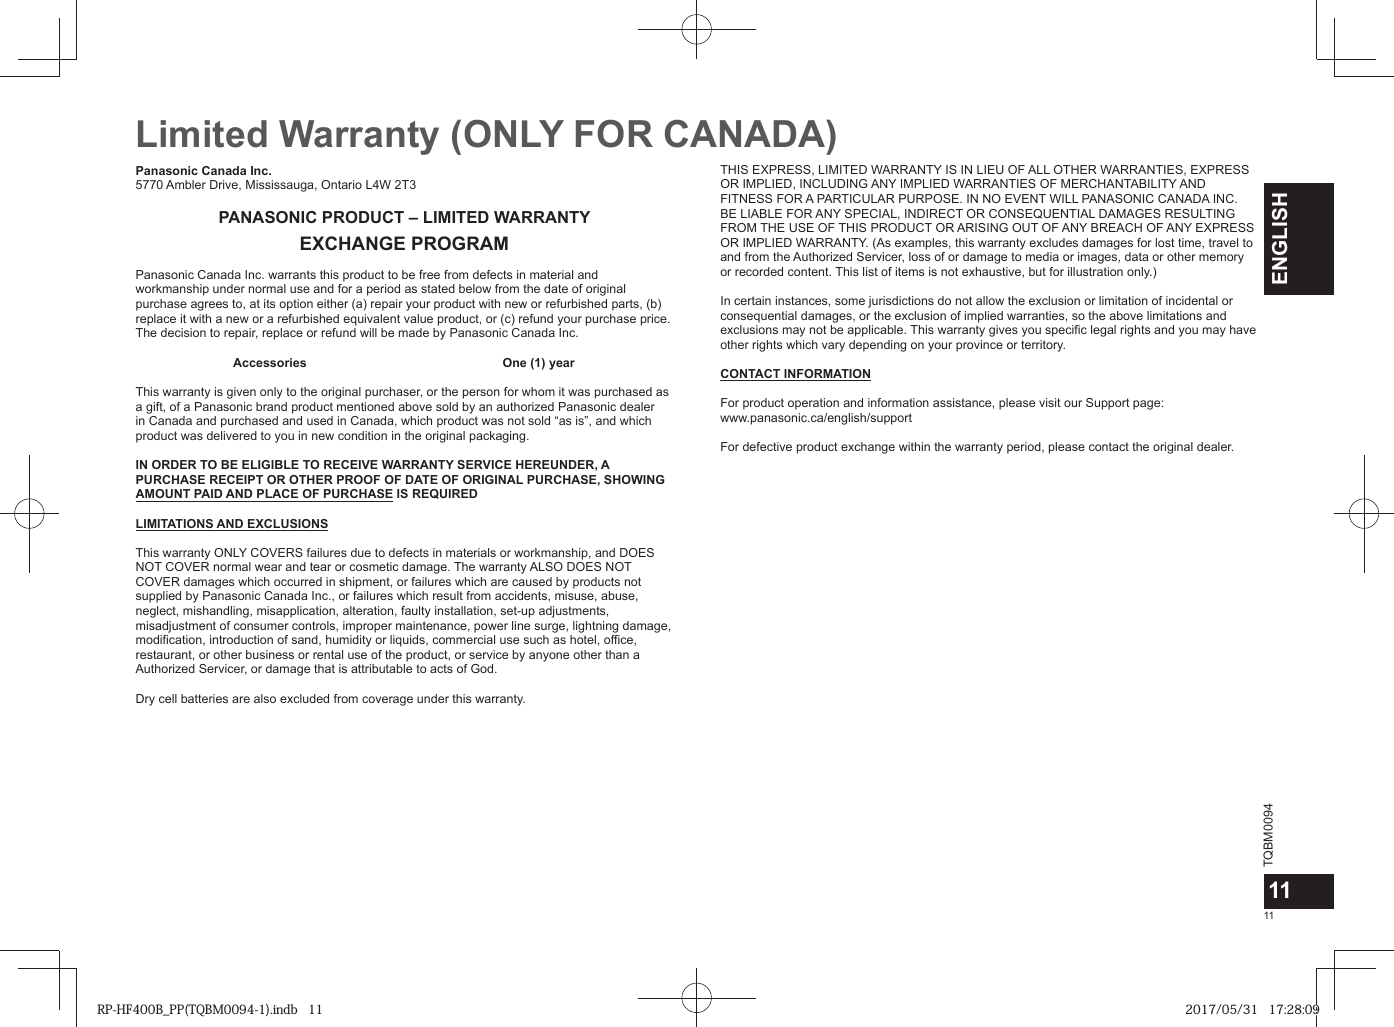 TQBM00941111ENGLISHLimited Warranty (ONLY FOR CANADA) Panasonic Canada Inc.5770 Ambler Drive, Mississauga, Ontario L4W 2T3PANASONIC PRODUCT – LIMITED WARRANTYEXCHANGE PROGRAMPanasonic Canada Inc. warrants this product to be free from defects in material and workmanship under normal use and for a period as stated below from the date of original purchase agrees to, at its option either (a) repair your product with new or refurbished parts, (b) replace it with a new or a refurbished equivalent value product, or (c) refund your purchase price. The decision to repair, replace or refund will be made by Panasonic Canada Inc. Accessories One (1) yearThis warranty is given only to the original purchaser, or the person for whom it was purchased as a gift, of a Panasonic brand product mentioned above sold by an authorized Panasonic dealer in Canada and purchased and used in Canada, which product was not sold “as is”, and which product was delivered to you in new condition in the original packaging.IN ORDER TO BE ELIGIBLE TO RECEIVE WARRANTY SERVICE HEREUNDER, A PURCHASE RECEIPT OR OTHER PROOF OF DATE OF ORIGINAL PURCHASE, SHOWING AMOUNT PAID AND PLACE OF PURCHASE IS REQUIRED LIMITATIONS AND EXCLUSIONSThis warranty ONLY COVERS failures due to defects in materials or workmanship, and DOES NOT COVER normal wear and tear or cosmetic damage. The warranty ALSO DOES NOT COVER damages which occurred in shipment, or failures which are caused by products not supplied by Panasonic Canada Inc., or failures which result from accidents, misuse, abuse, neglect, mishandling, misapplication, alteration, faulty installation, set-up adjustments, misadjustment of consumer controls, improper maintenance, power line surge, lightning damage, modification, introduction of sand, humidity or liquids, commercial use such as hotel, office, restaurant, or other business or rental use of the product, or service by anyone other than a Authorized Servicer, or damage that is attributable to acts of God. Dry cell batteries are also excluded from coverage under this warranty. THIS EXPRESS, LIMITED WARRANTY IS IN LIEU OF ALL OTHER WARRANTIES, EXPRESS OR IMPLIED, INCLUDING ANY IMPLIED WARRANTIES OF MERCHANTABILITY AND FITNESS FOR A PARTICULAR PURPOSE. IN NO EVENT WILL PANASONIC CANADA INC. BE LIABLE FOR ANY SPECIAL, INDIRECT OR CONSEQUENTIAL DAMAGES RESULTING FROM THE USE OF THIS PRODUCT OR ARISING OUT OF ANY BREACH OF ANY EXPRESS OR IMPLIED WARRANTY. (As examples, this warranty excludes damages for lost time, travel to and from the Authorized Servicer, loss of or damage to media or images, data or other memory or recorded content. This list of items is not exhaustive, but for illustration only.)In certain instances, some jurisdictions do not allow the exclusion or limitation of incidental or consequential damages, or the exclusion of implied warranties, so the above limitations and exclusions may not be applicable. This warranty gives you specific legal rights and you may have other rights which vary depending on your province or territory. CONTACT INFORMATIONFor product operation and information assistance, please visit our Support page:www.panasonic.ca/english/supportFor defective product exchange within the warranty period, please contact the original dealer.RP-HF400B_PP(TQBM0094-1).indb   11RP-HF400B_PP(TQBM0094-1).indb   11 2017/05/31   17:28:092017/05/31   17:28:09